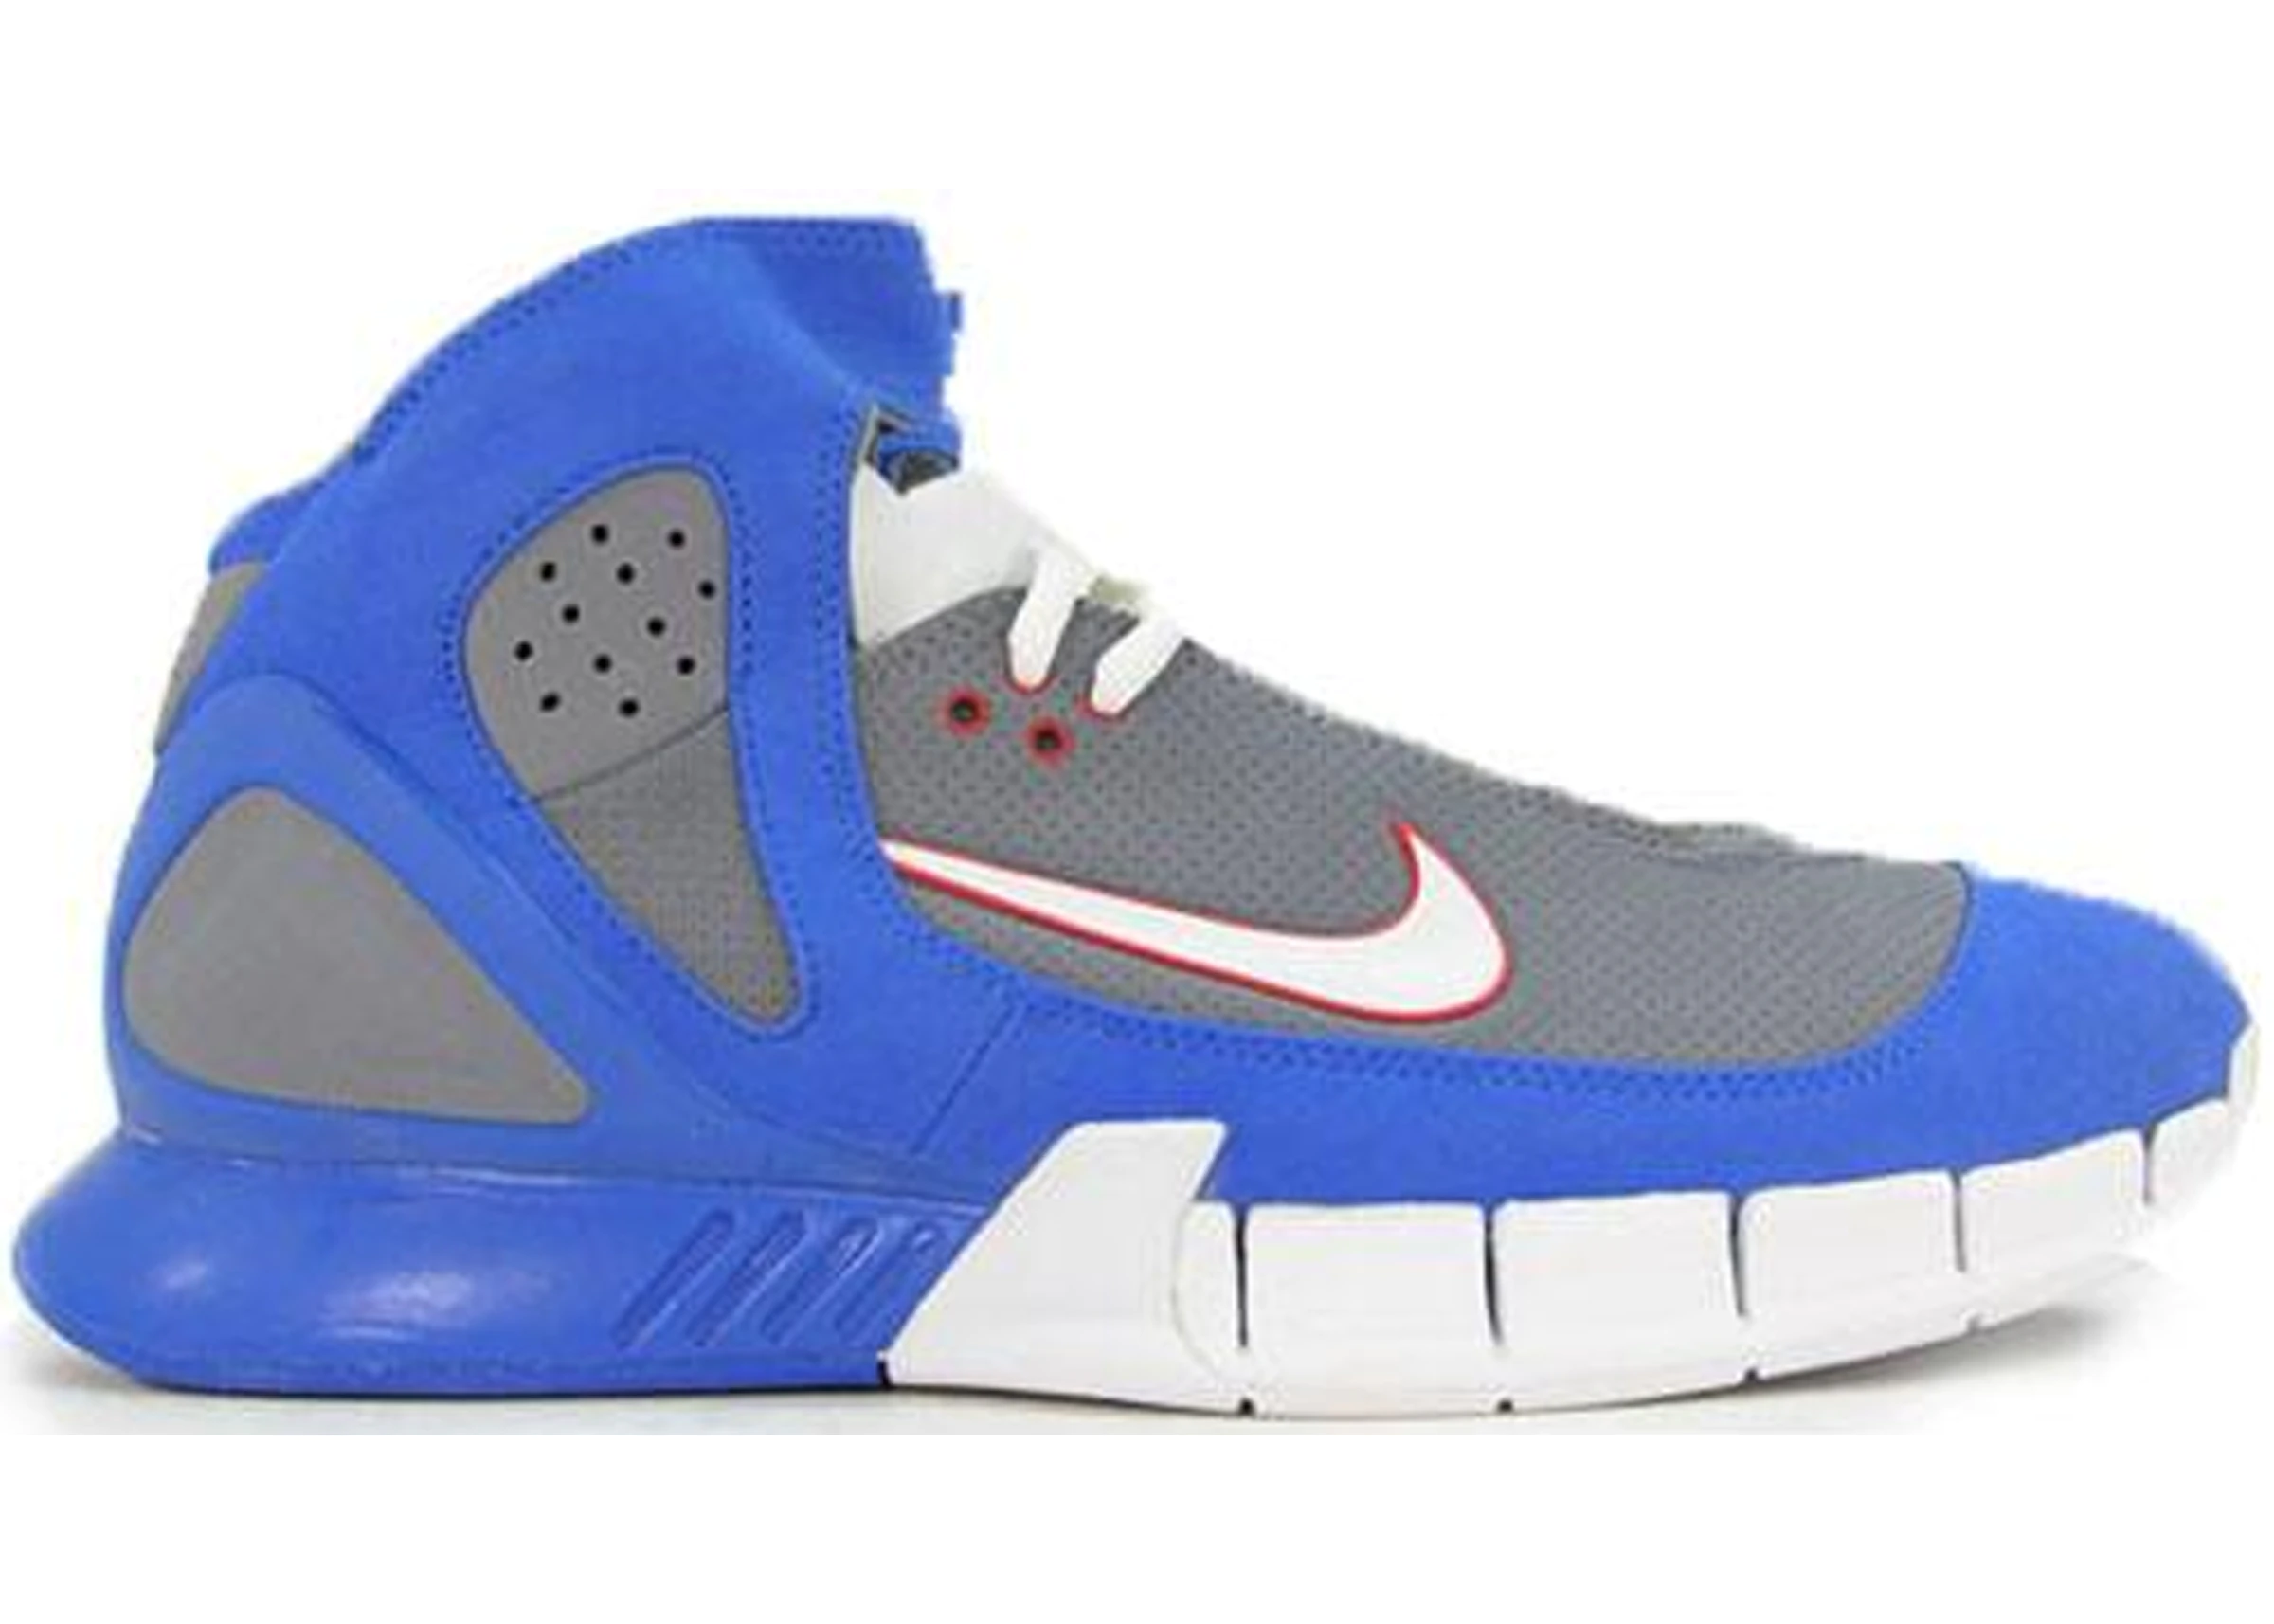 Sunny inference broadcast Nike Air Zoom Huarache 2K5 All-Star (2005) - 310850-015/310850-011 - US